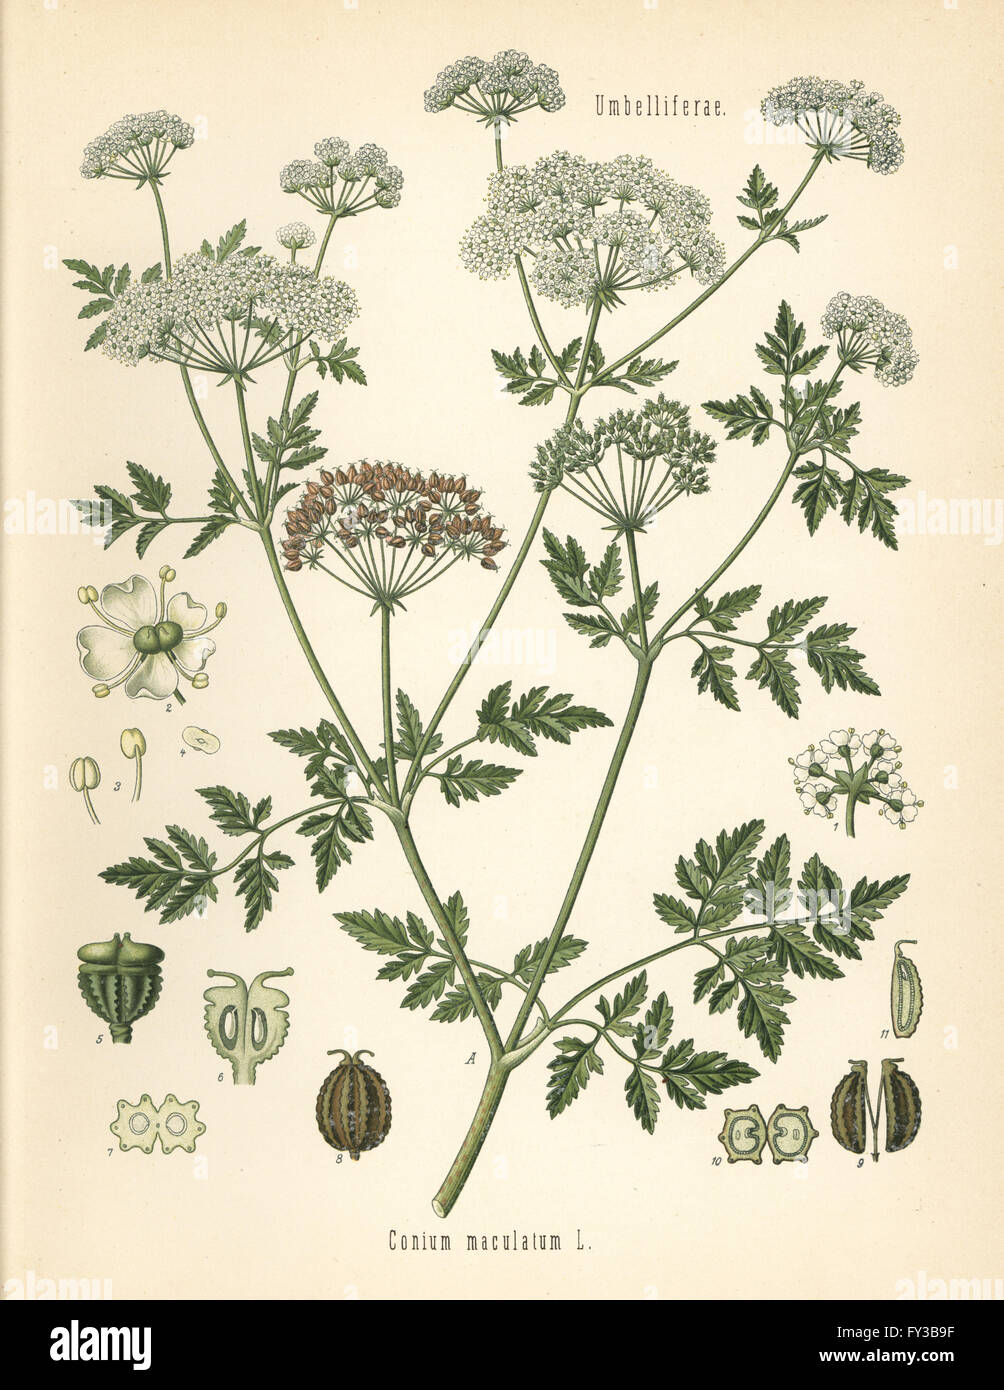 Poison hemlock, Conium maculatum. Chromolithograph after a botanical illustration from Hermann Adolph Koehler's Medicinal Plants, edited by Gustav Pabst, Koehler, Germany, 1887. Stock Photo